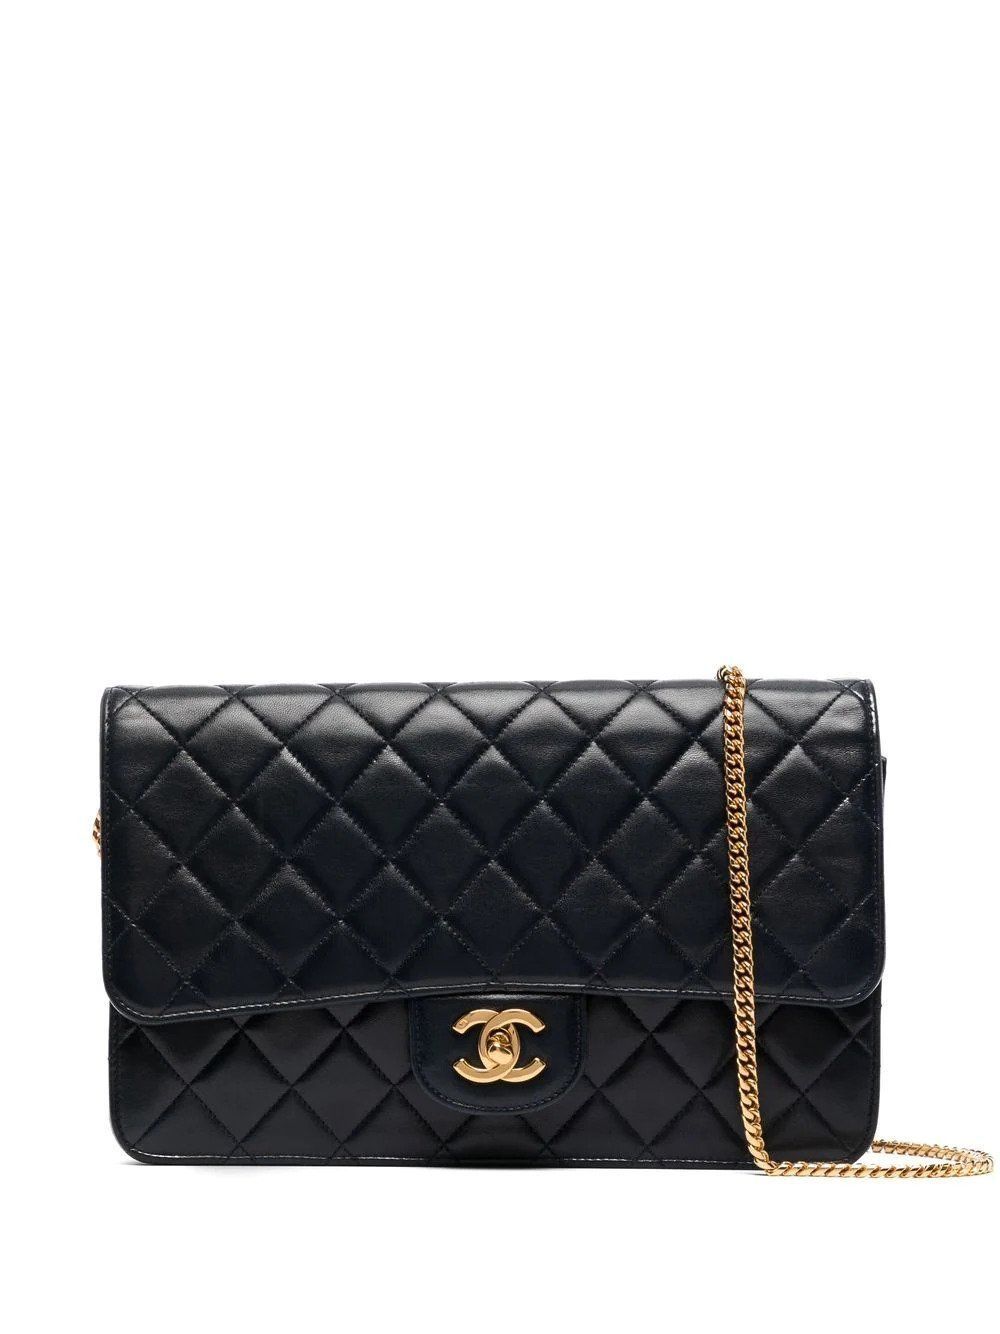 The Ultimate Chanel Flap Guide  Academy by FASHIONPHILE